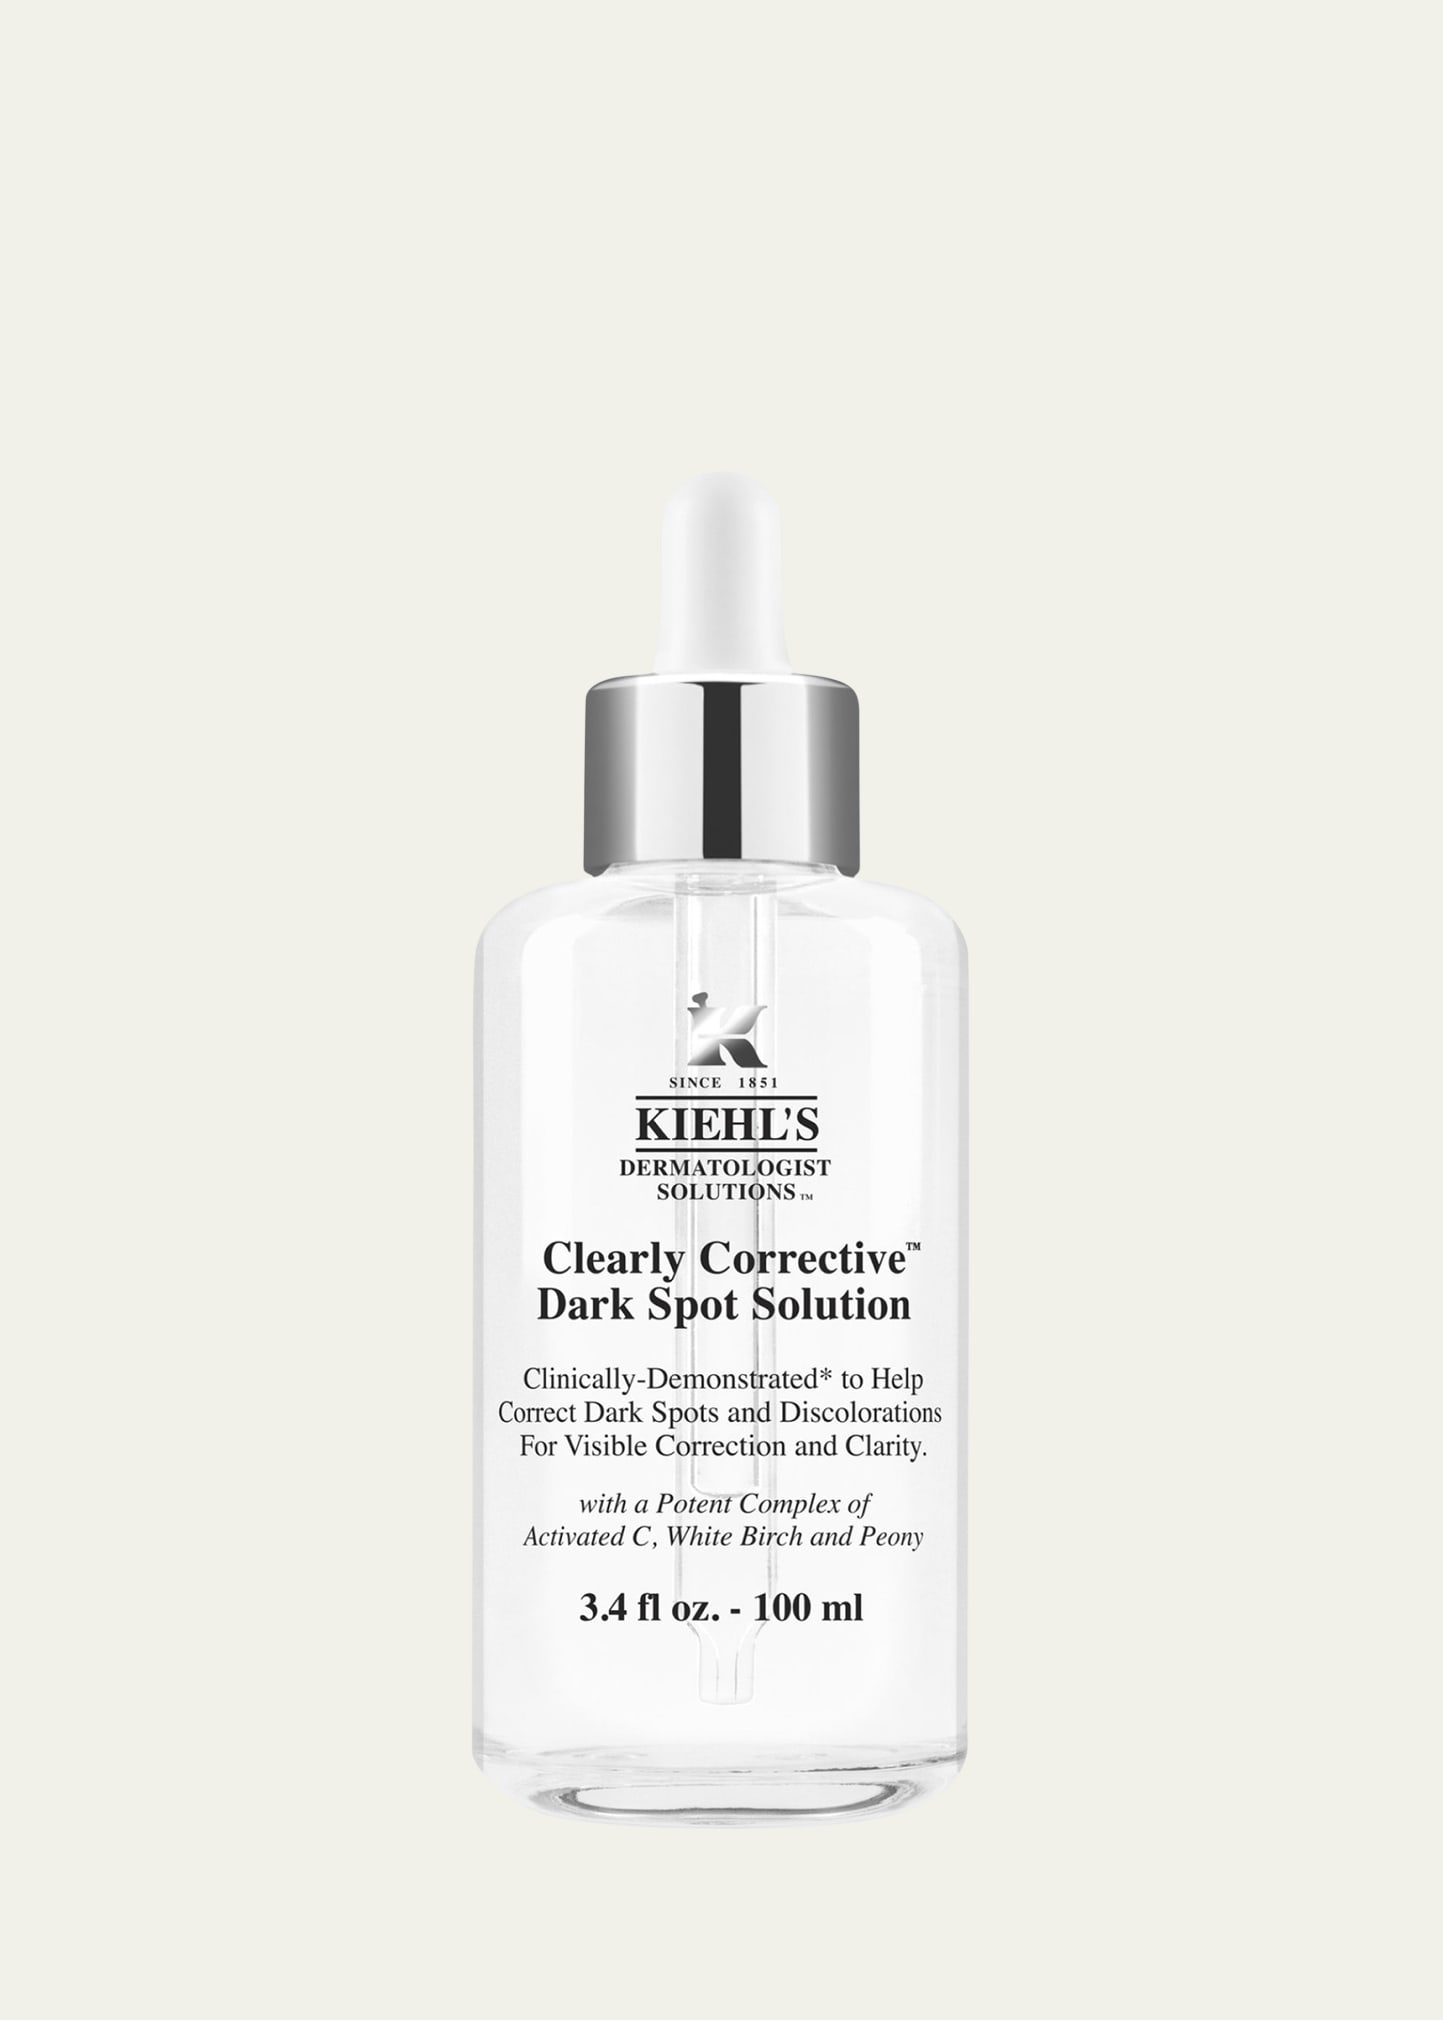 Clearly Corrective Dark Spot Solution, 3.4 oz.